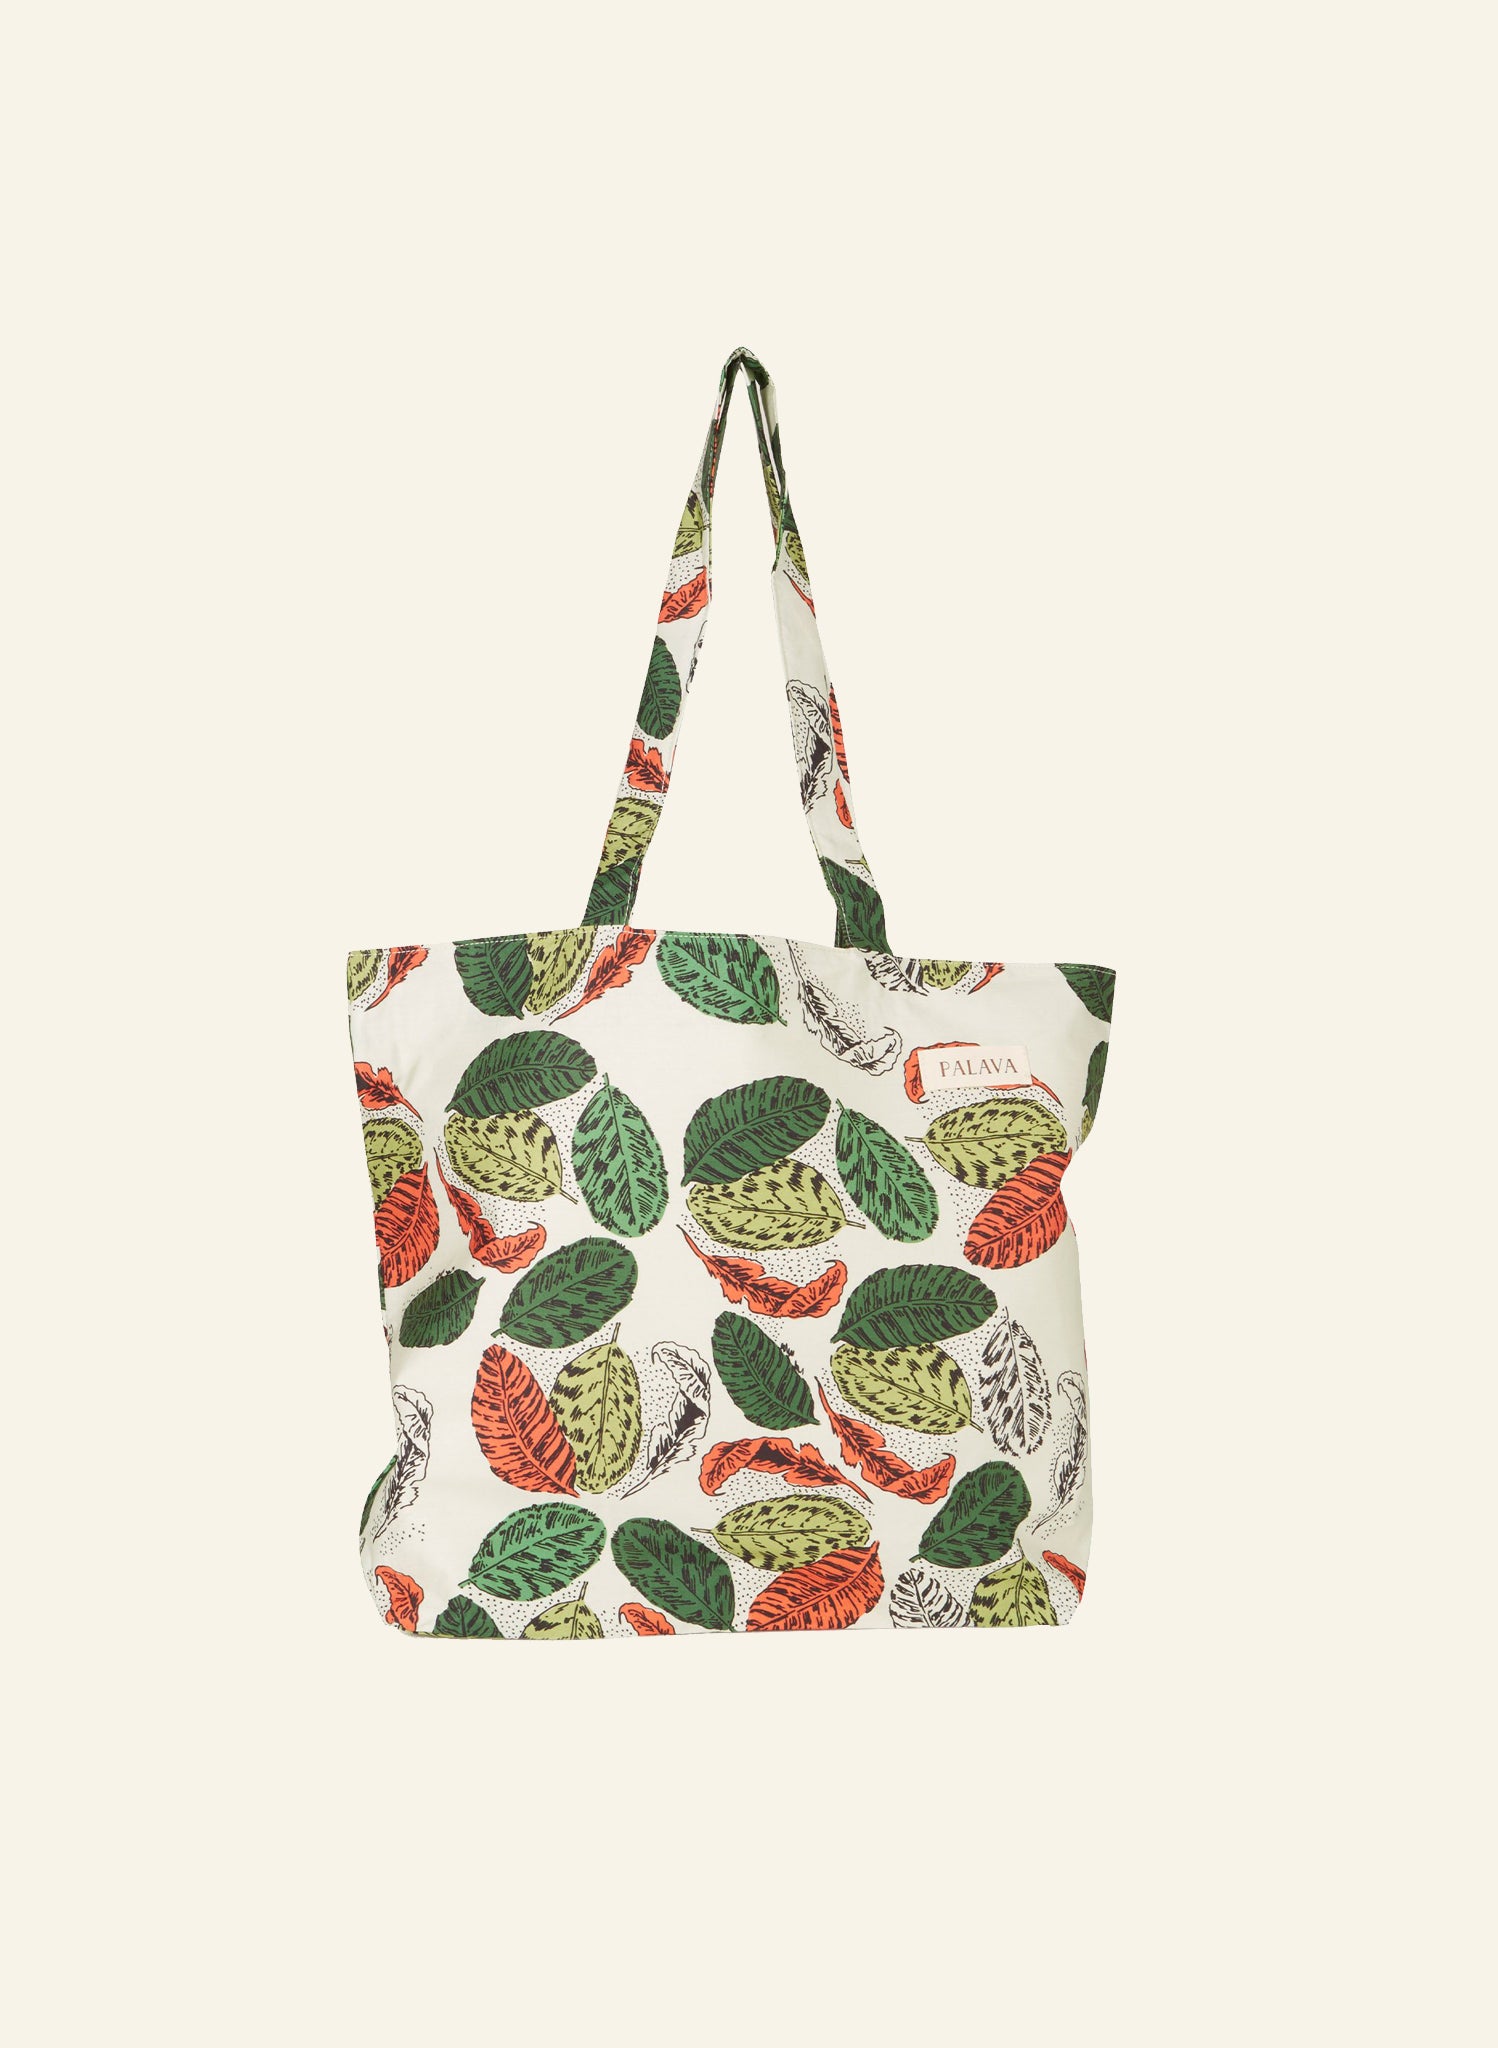 Upcycled Tote Bags & Accessories | Zero Waste Collection | Palava